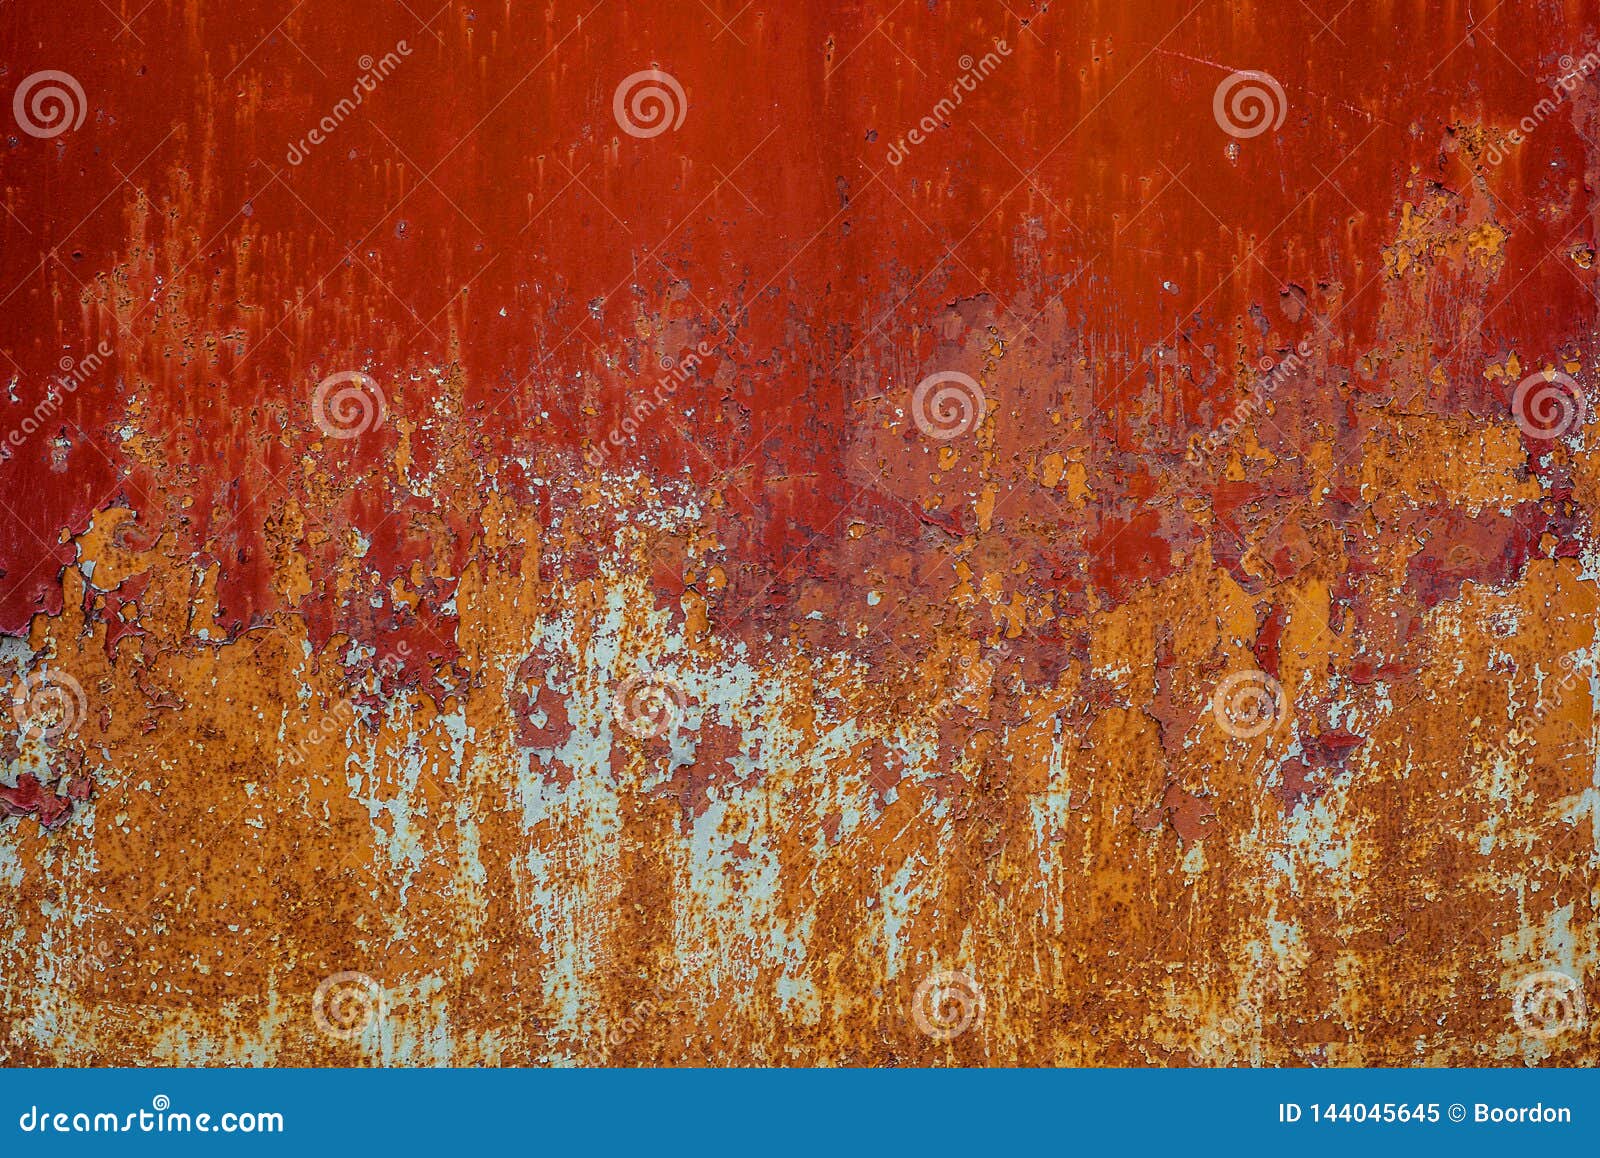 texture of old rusty metal, painted red which becames orange from rust